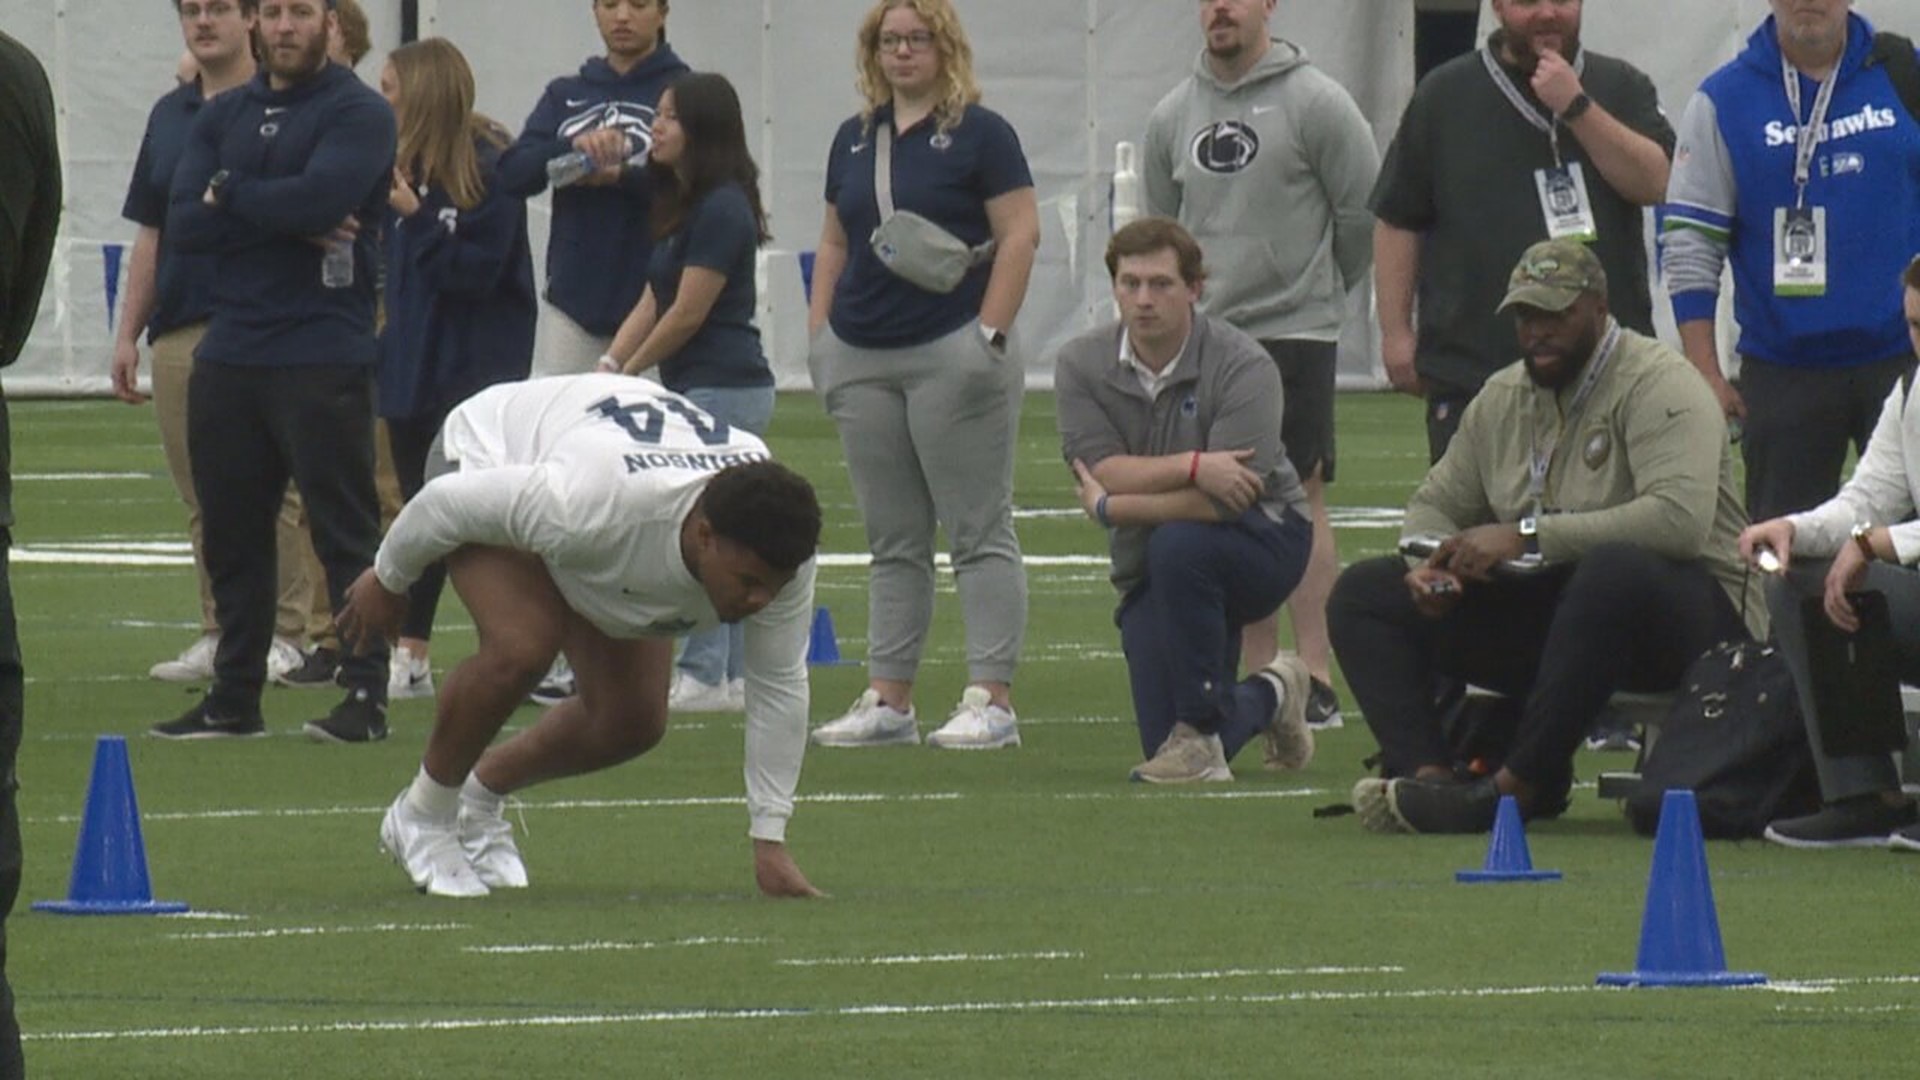 Penn State Pro Day showcases Nittany Lions talent heading into